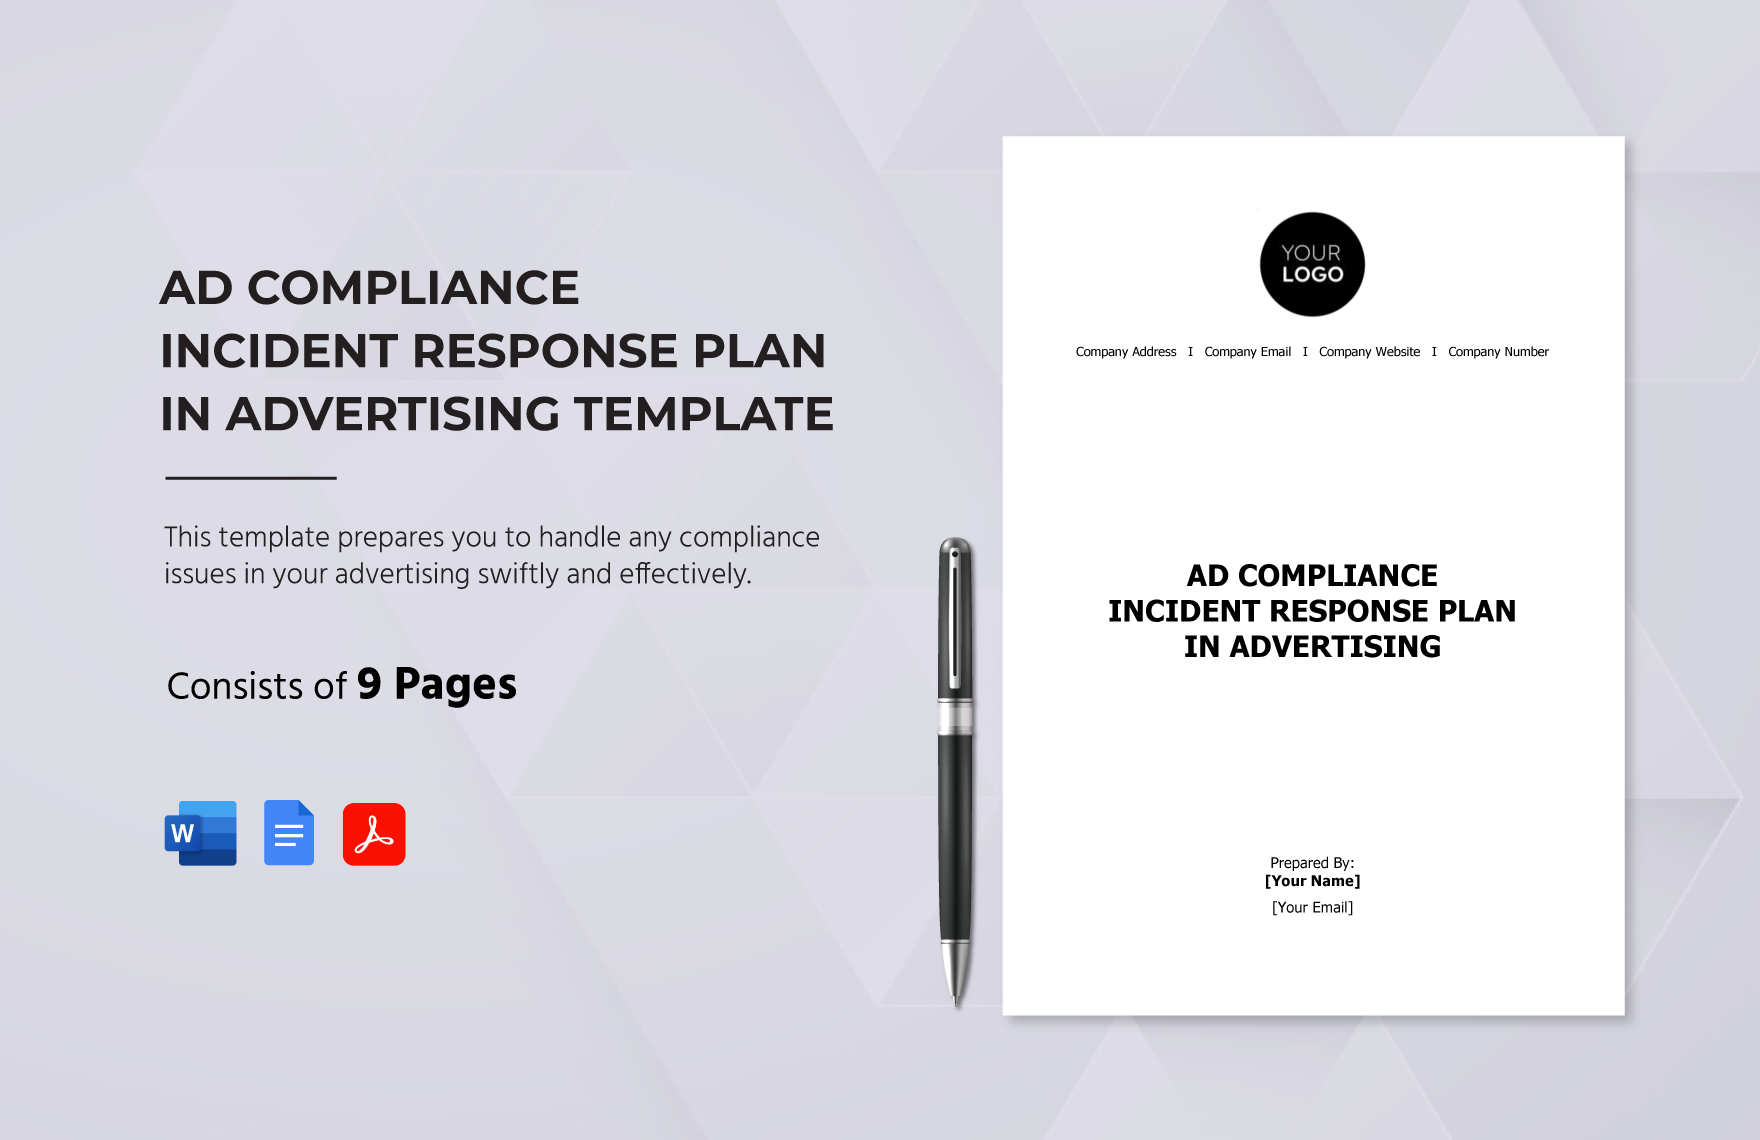 Ad Compliance Incident Response Plan in Advertising Template